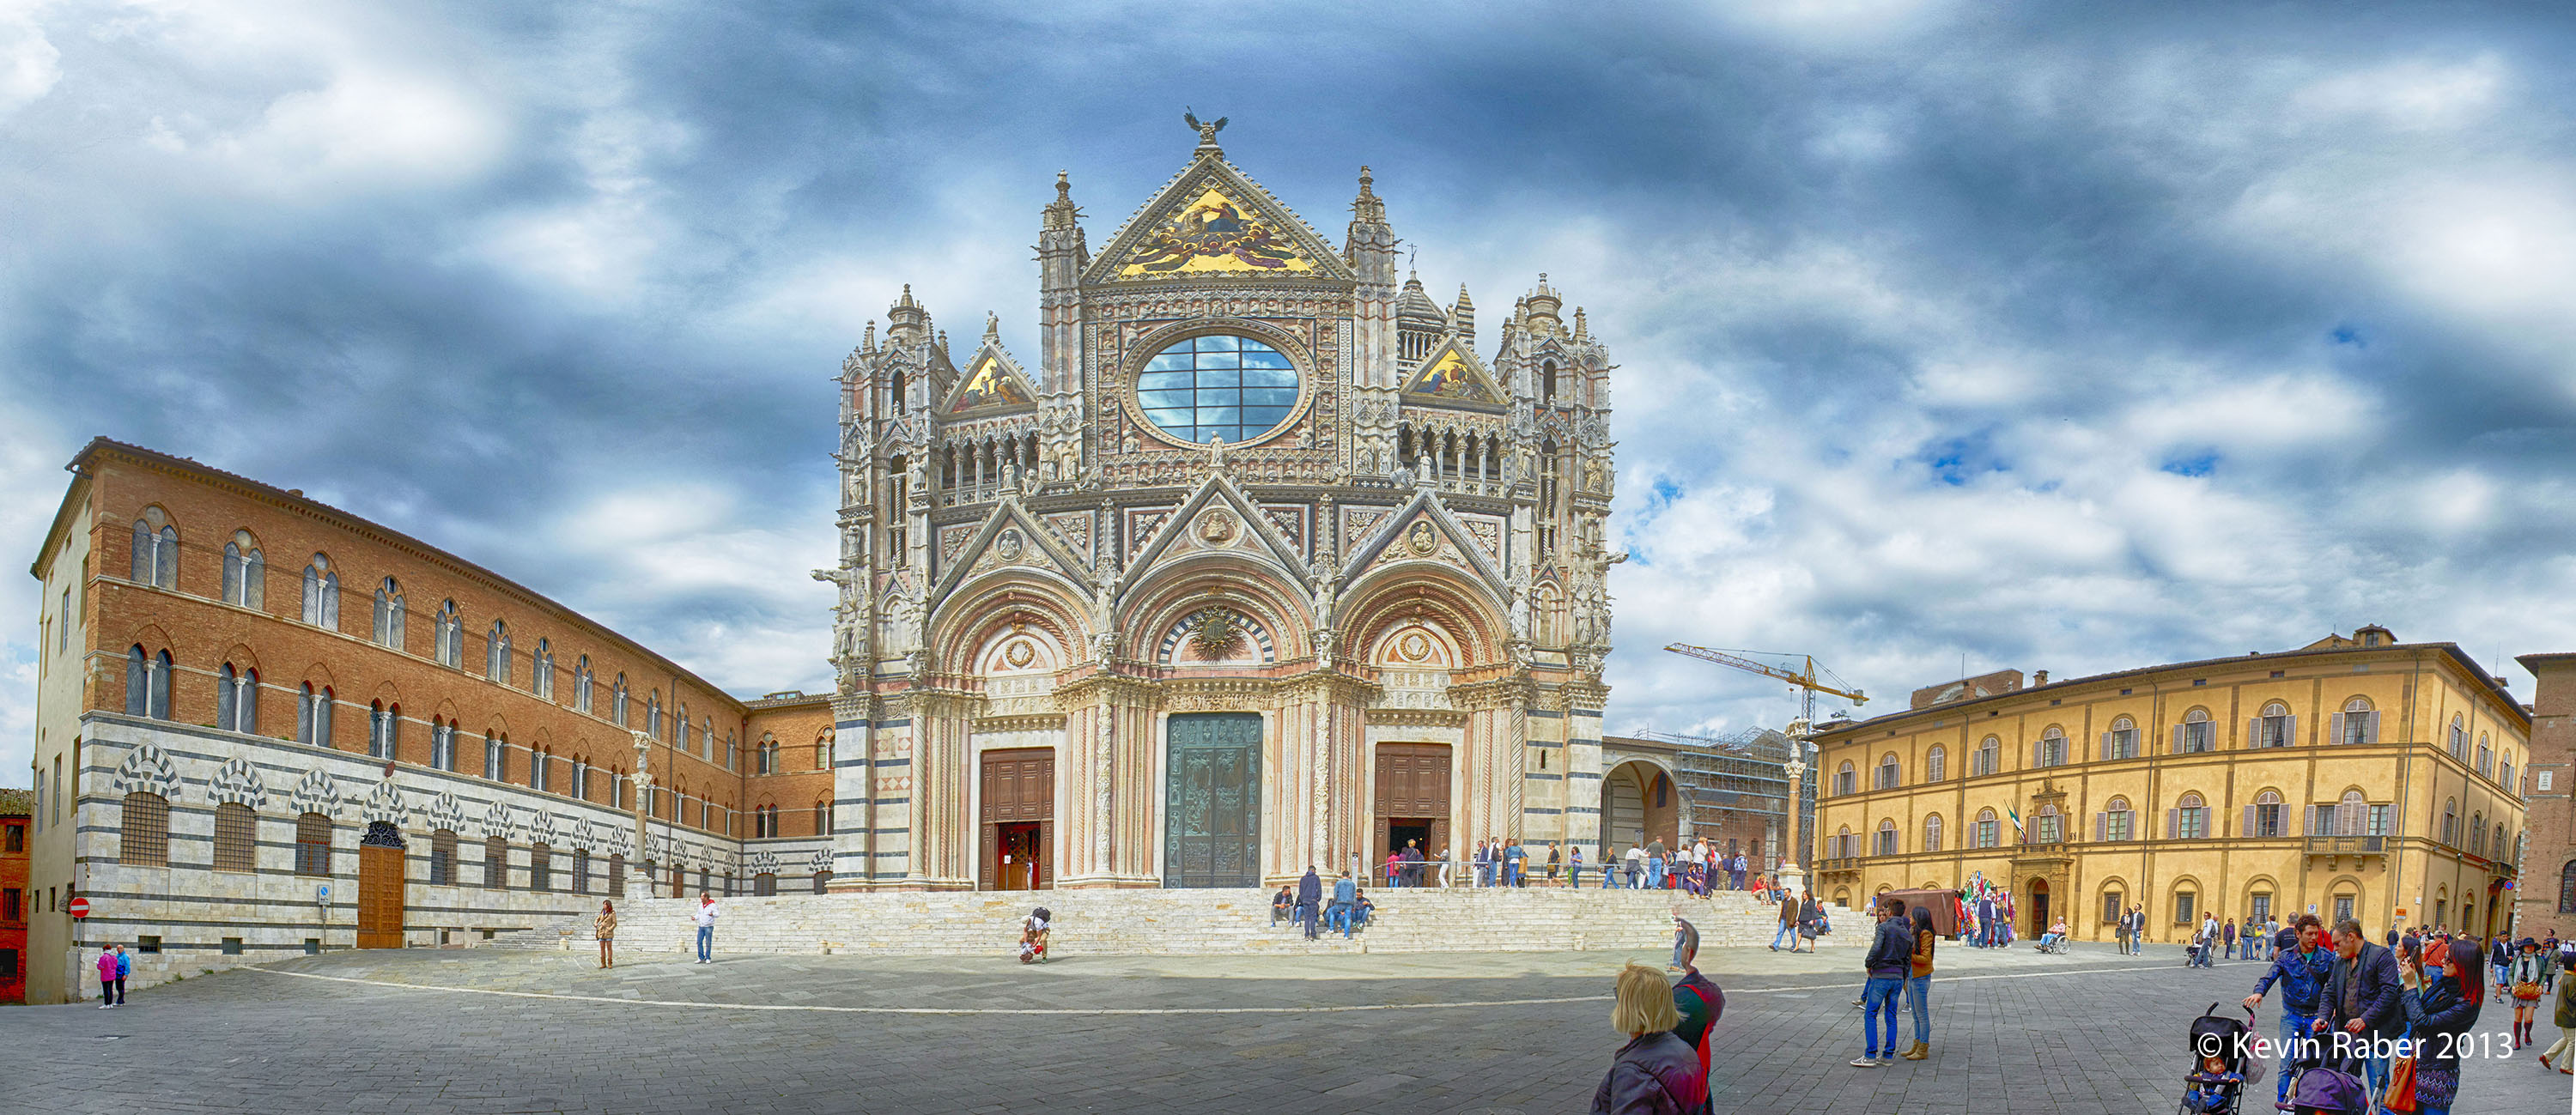 The Cathedral In Siena, Tuscany region of Italy